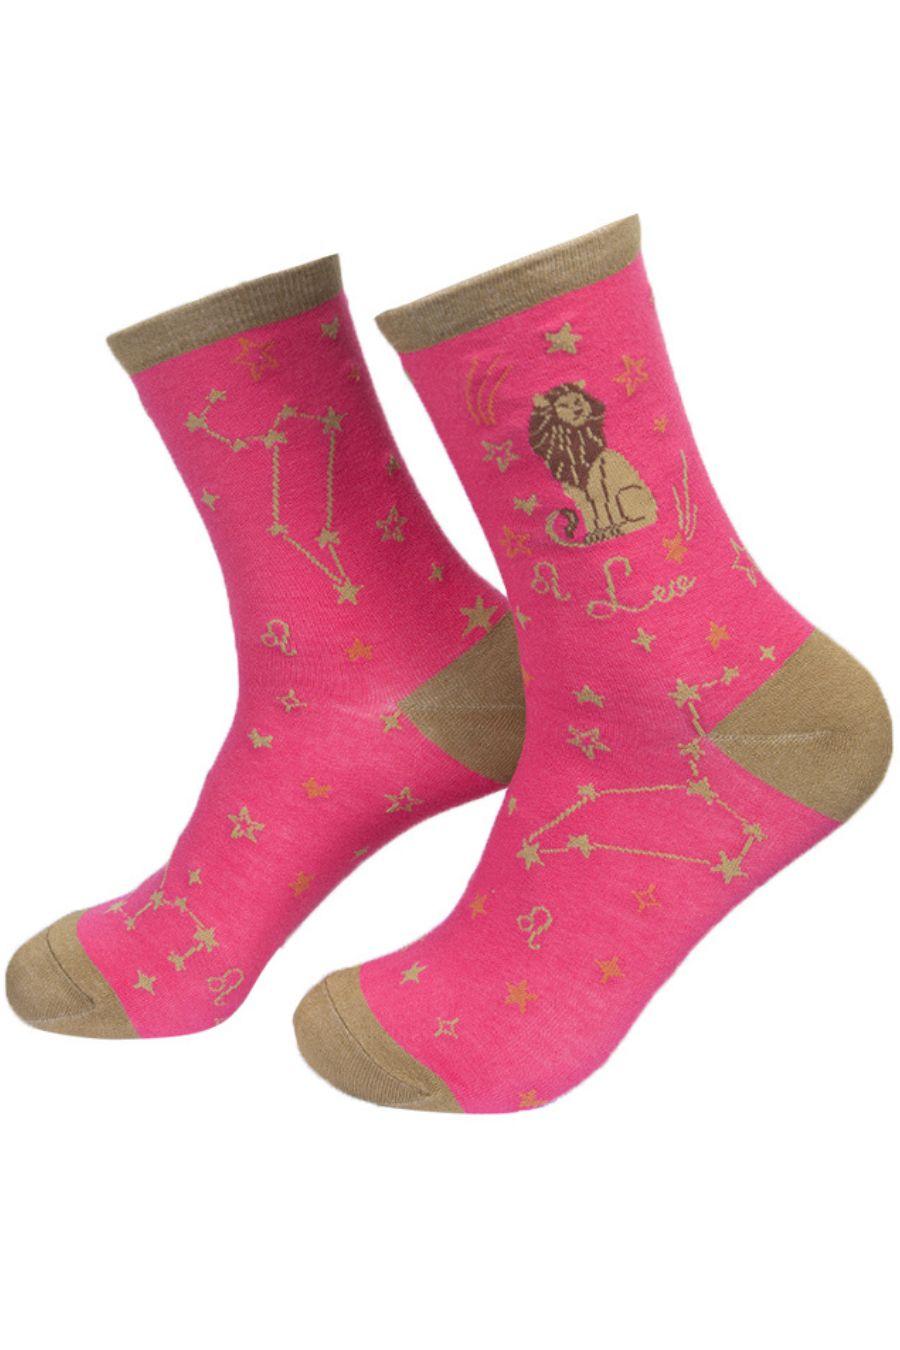 pink, mustard ankle socks with showing the star sign and constellation of Leo